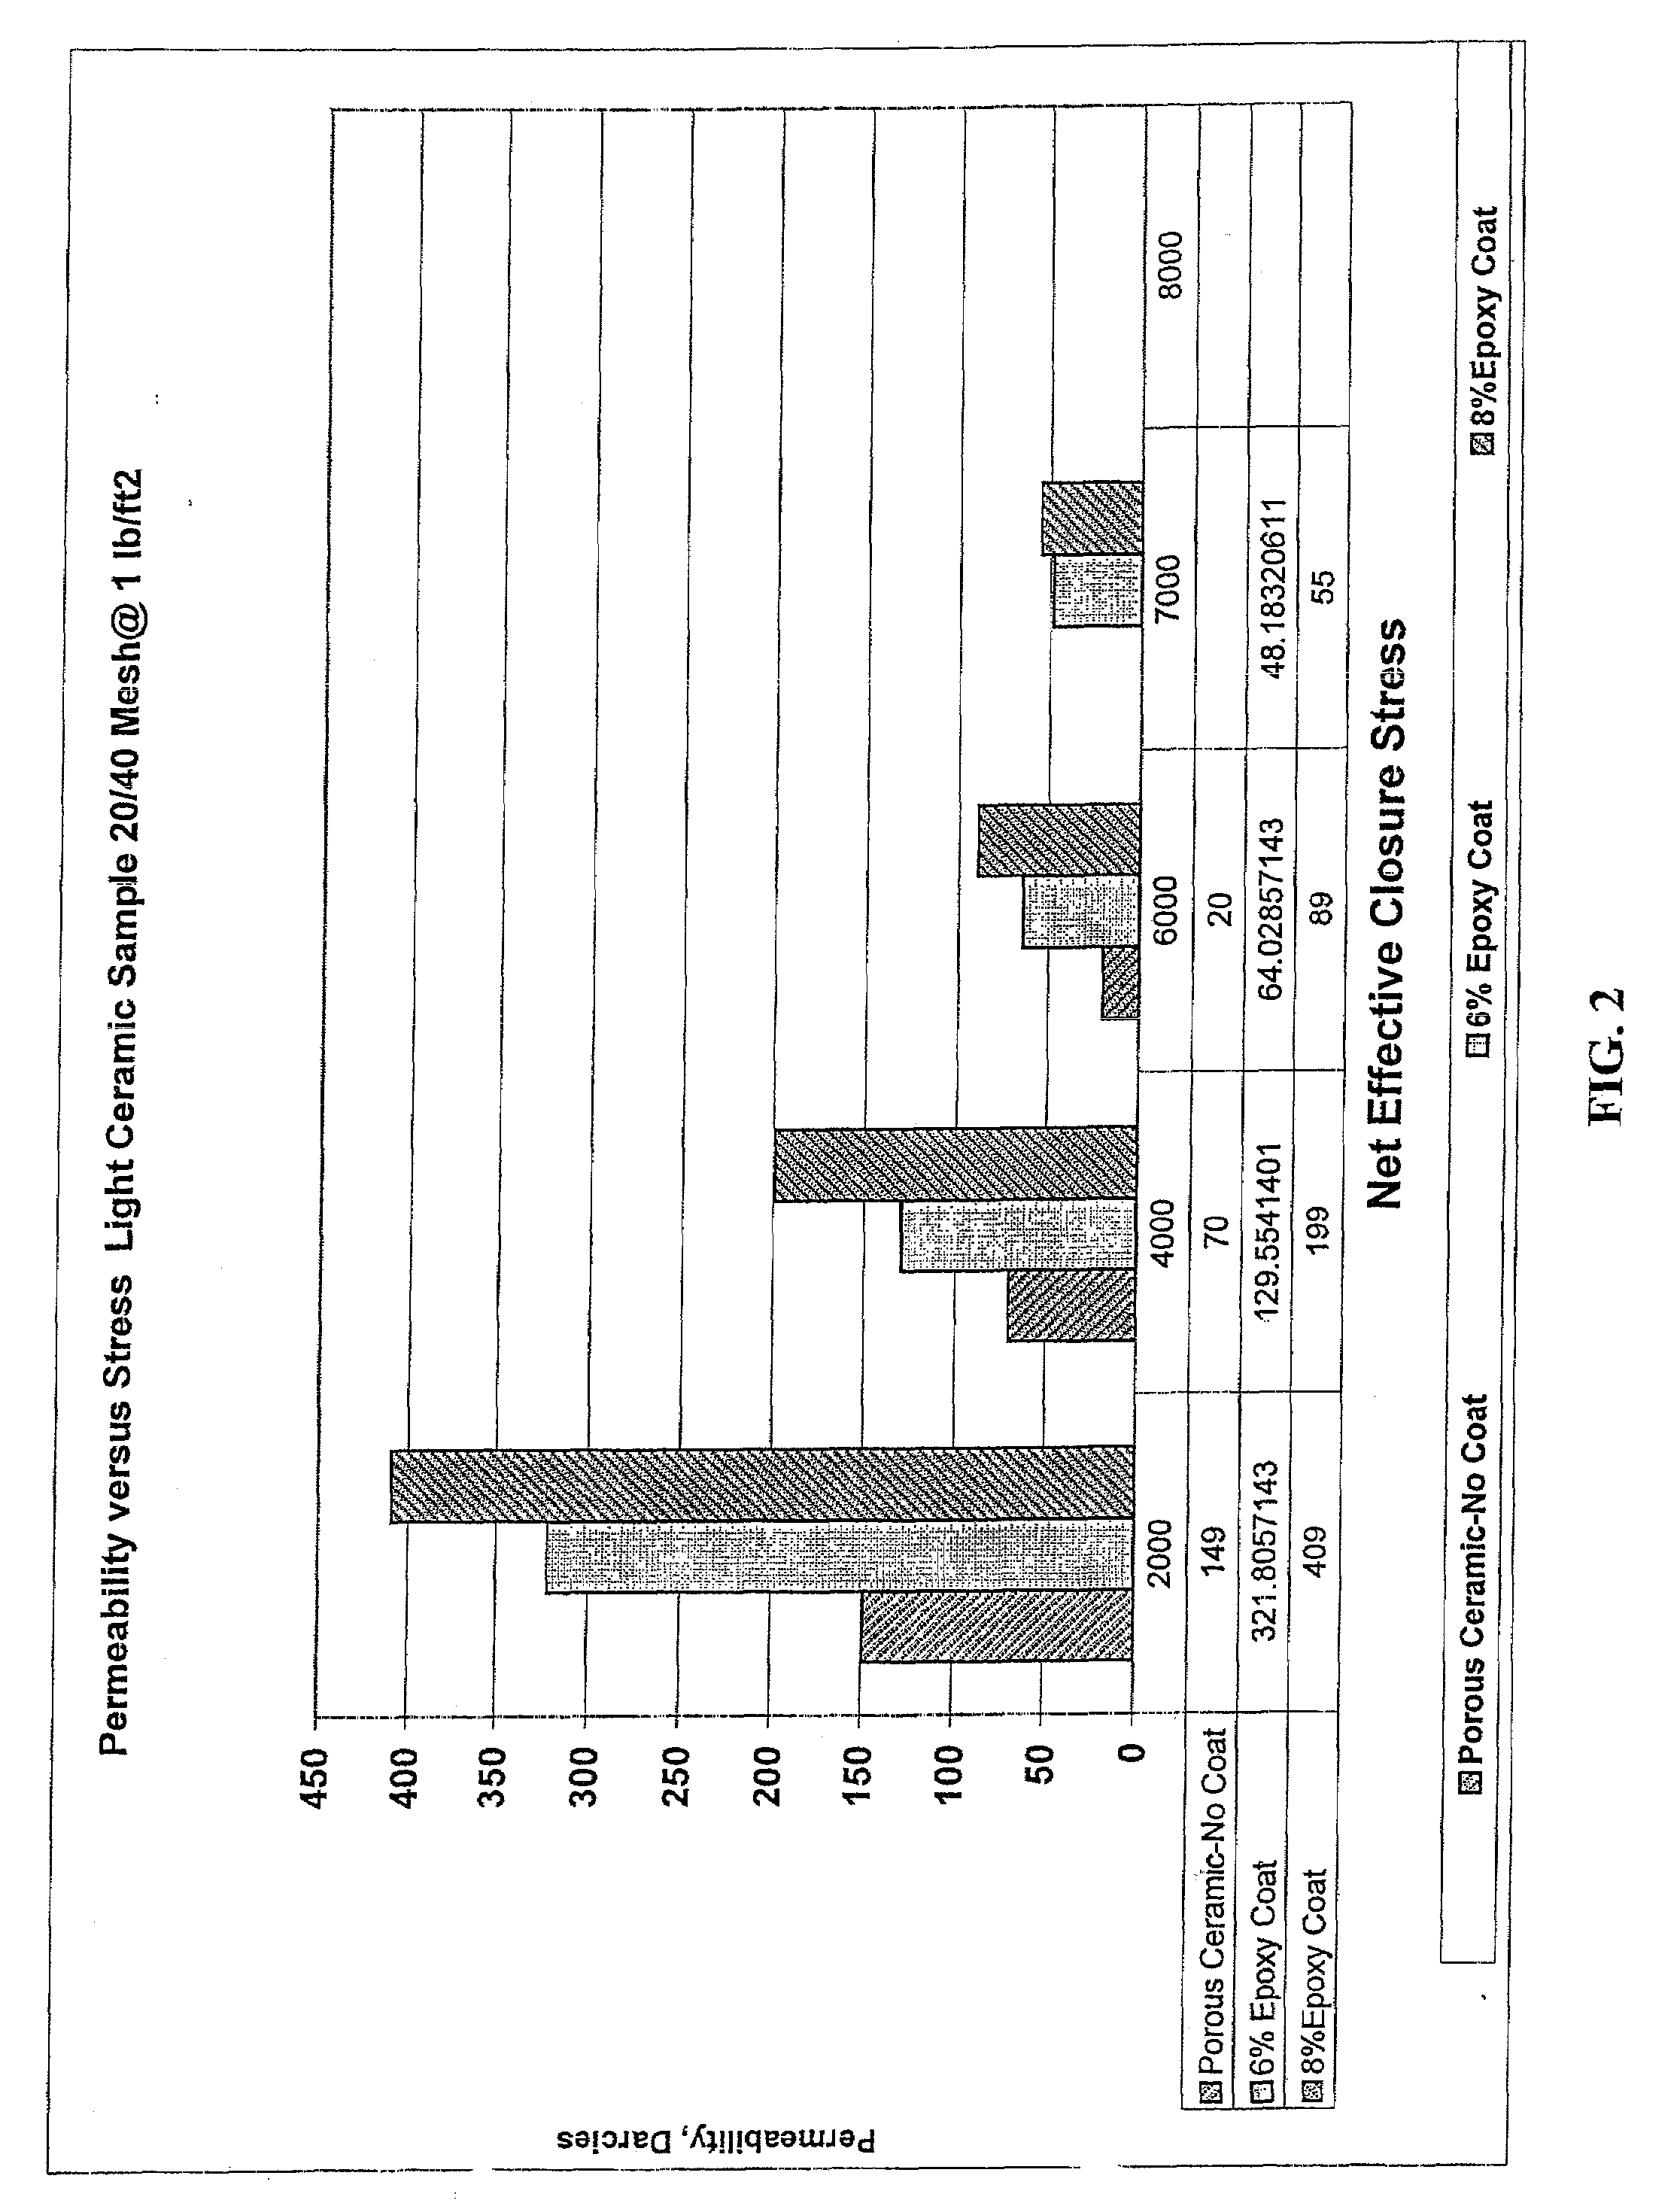 Method of Fracturing Hydrocarbon-Bearing Formation With Coated Porous Polyolefin Particulate